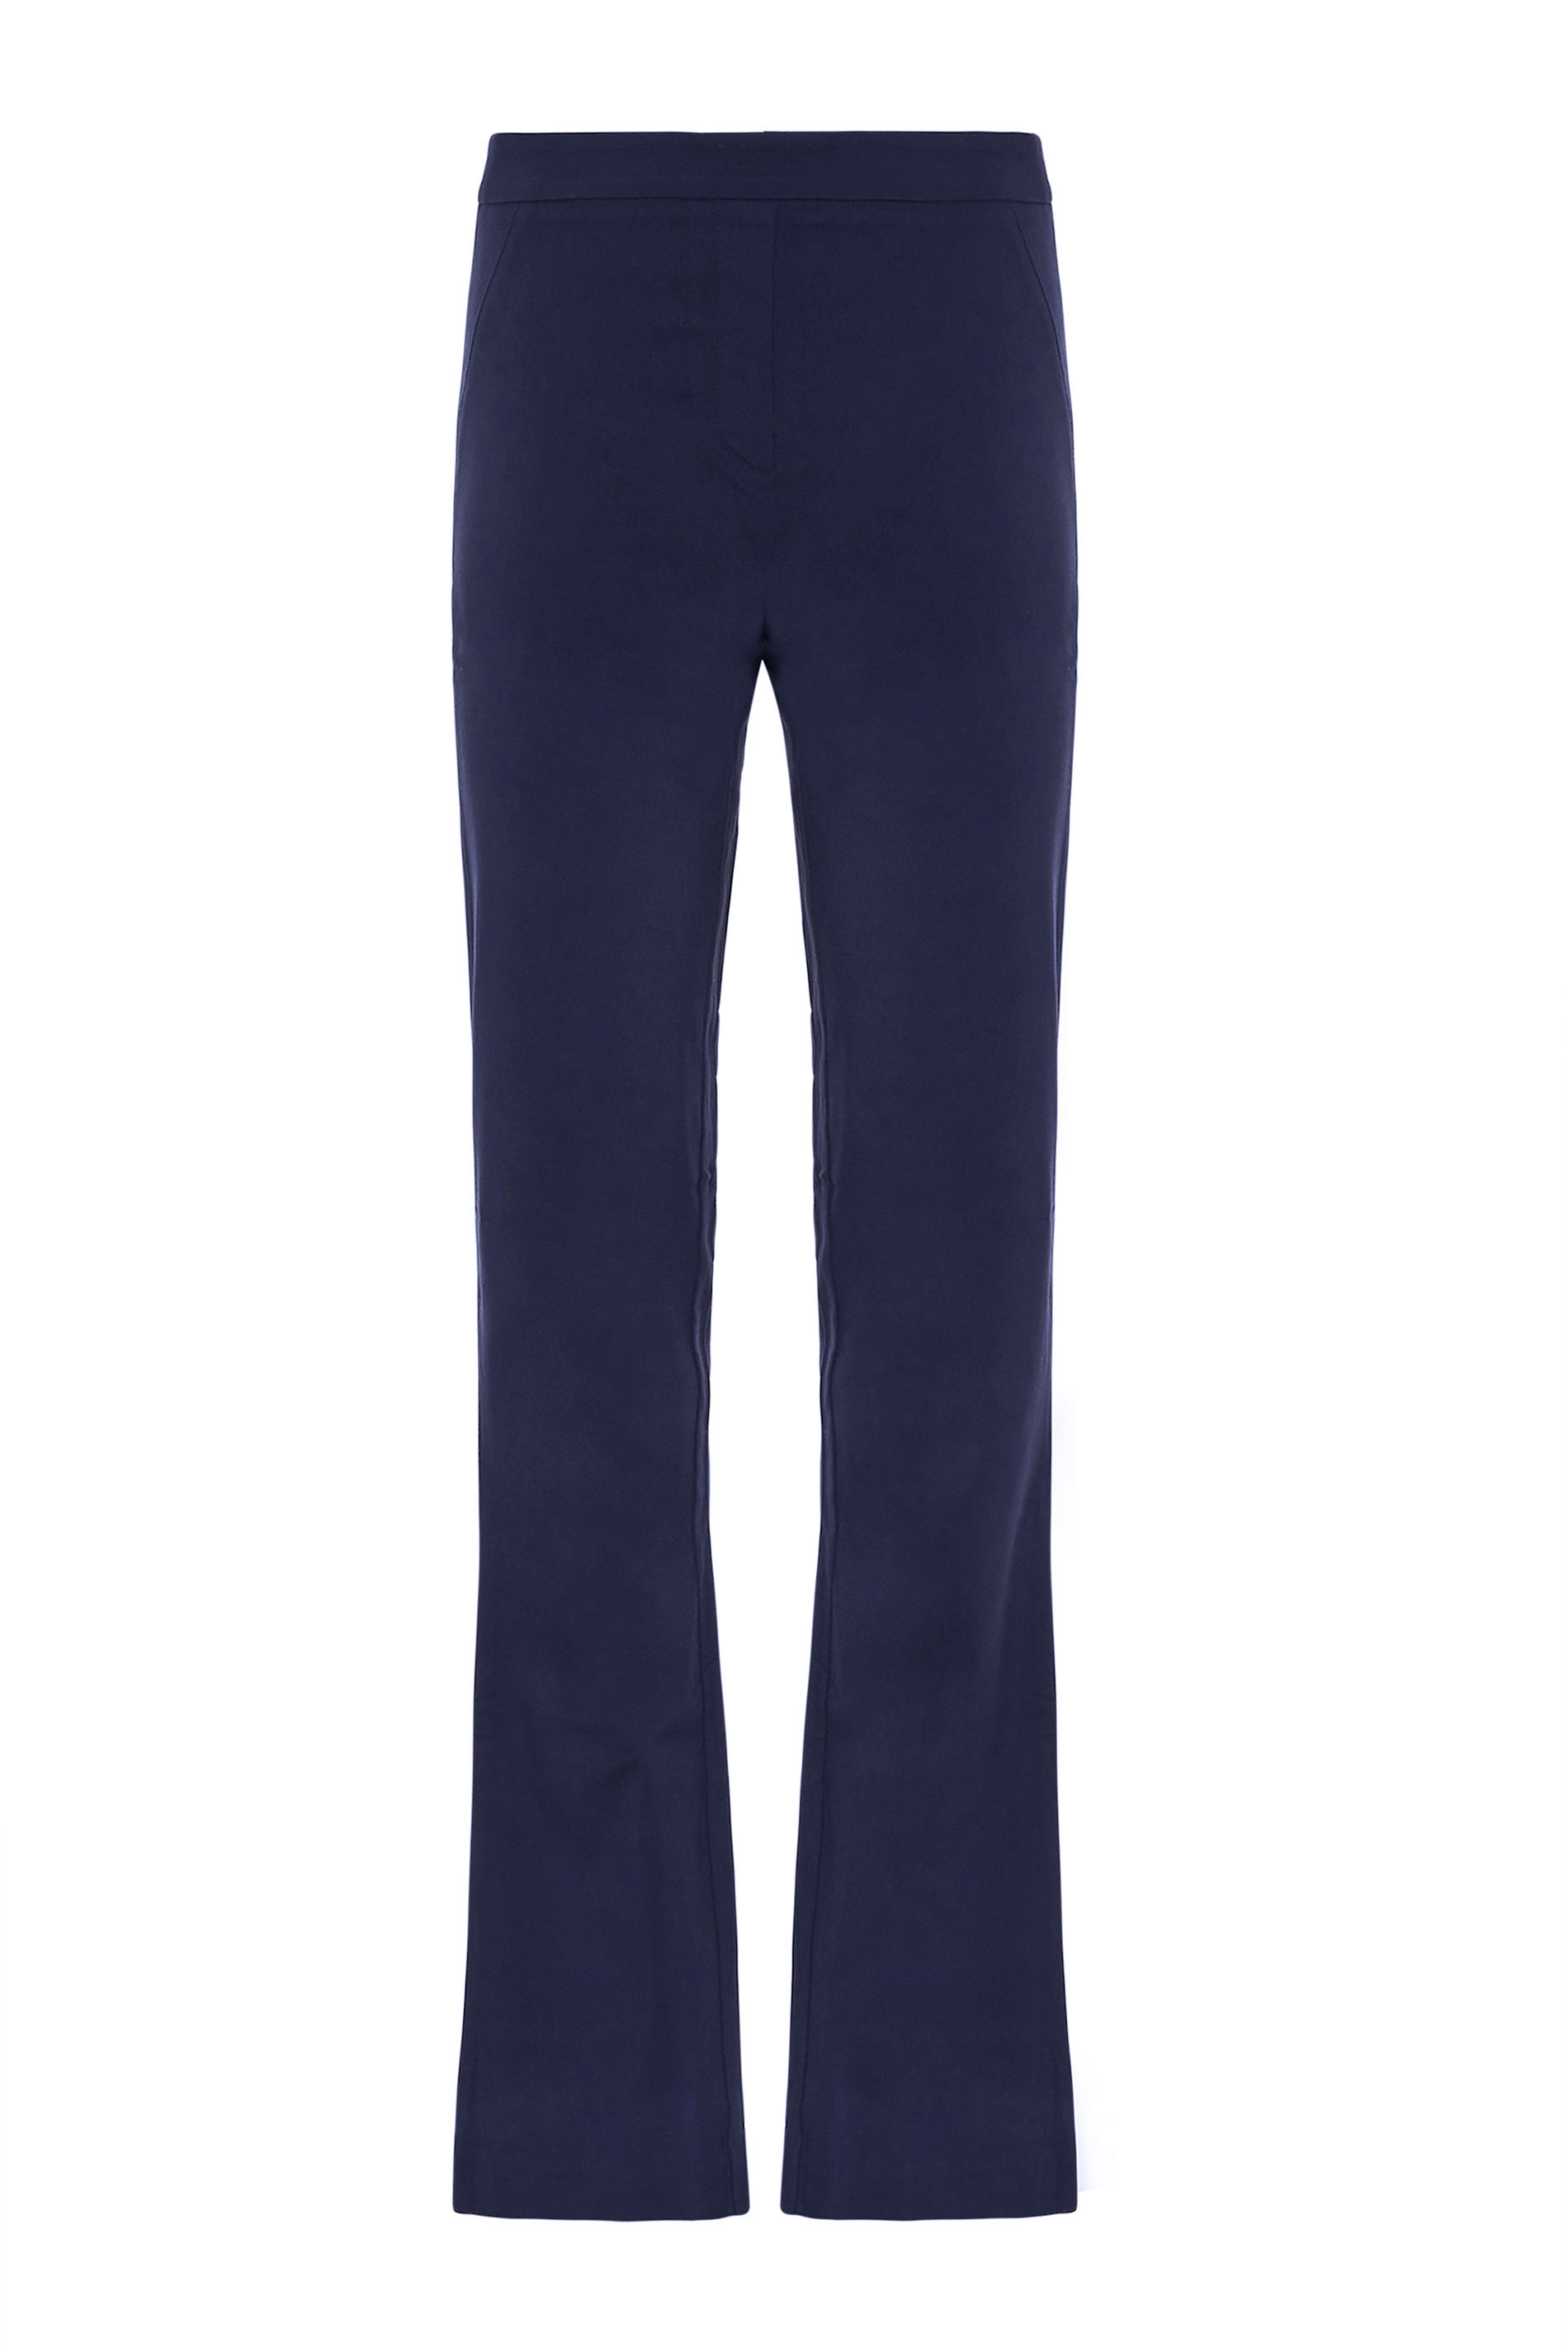 Navy Allegro Bootcut Trousers | Long Tall Sally